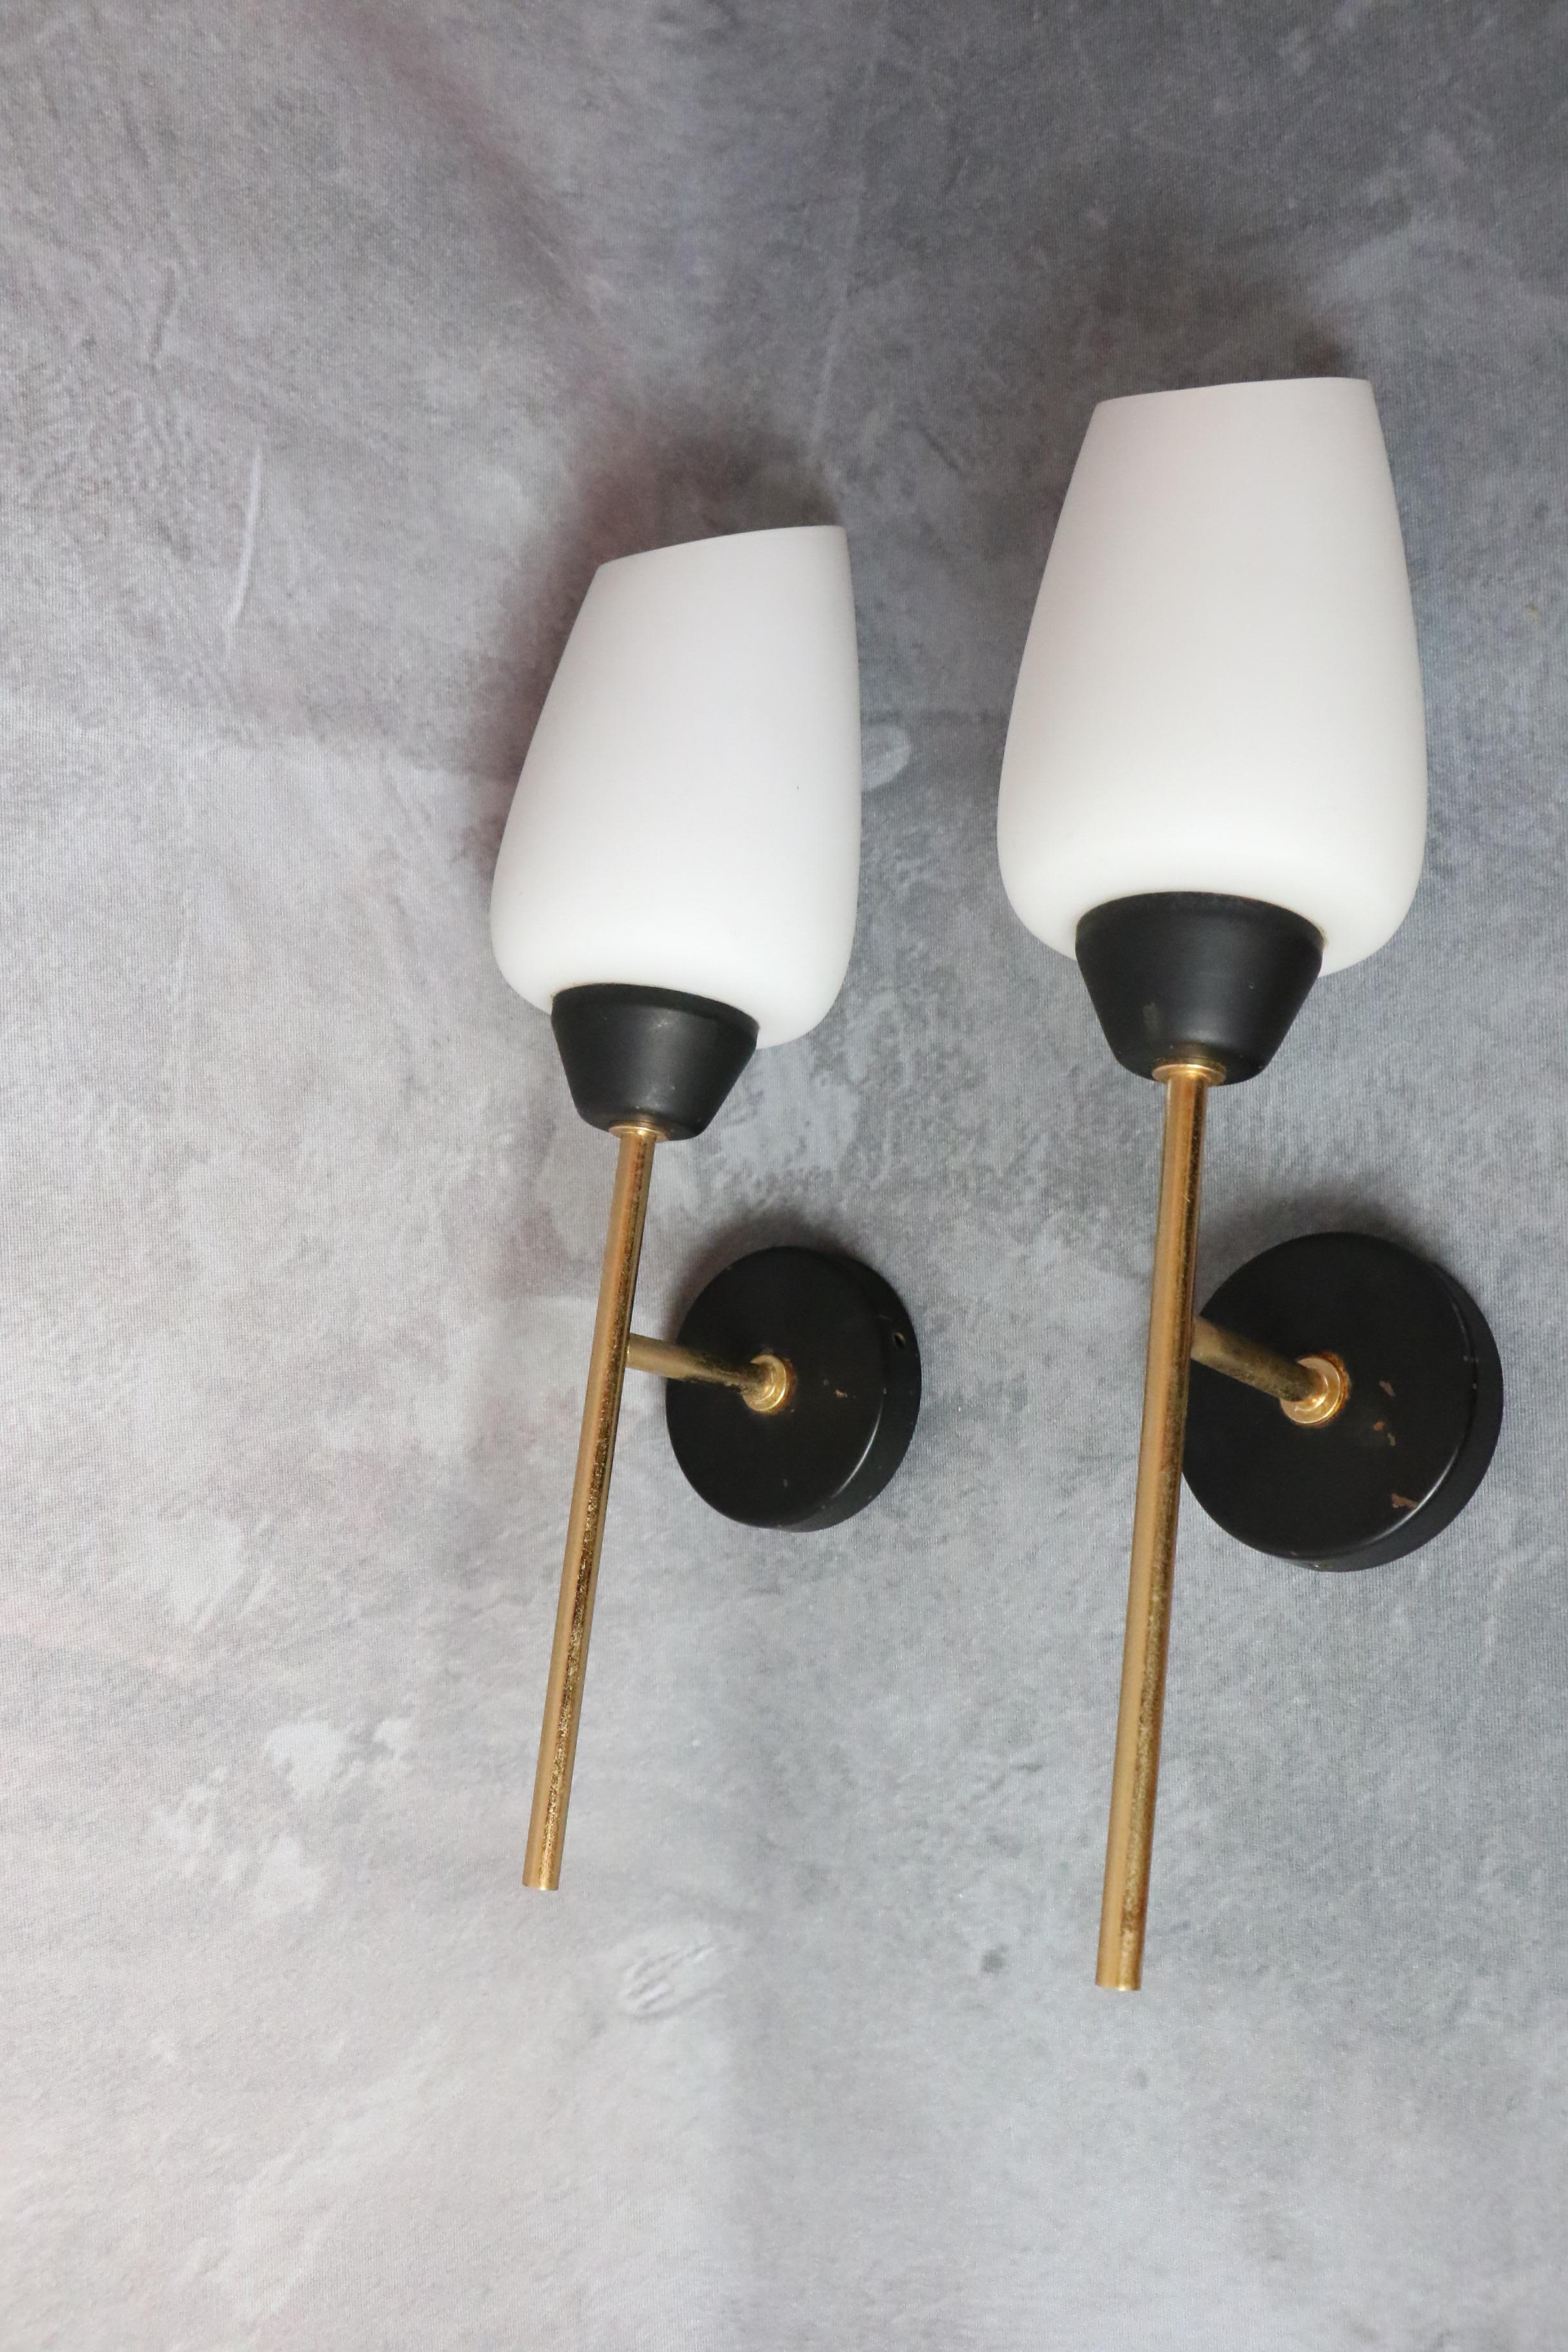 20th Century Maison Lunel - Pair of Mid-Century Modern Wall lights - 1950s France For Sale